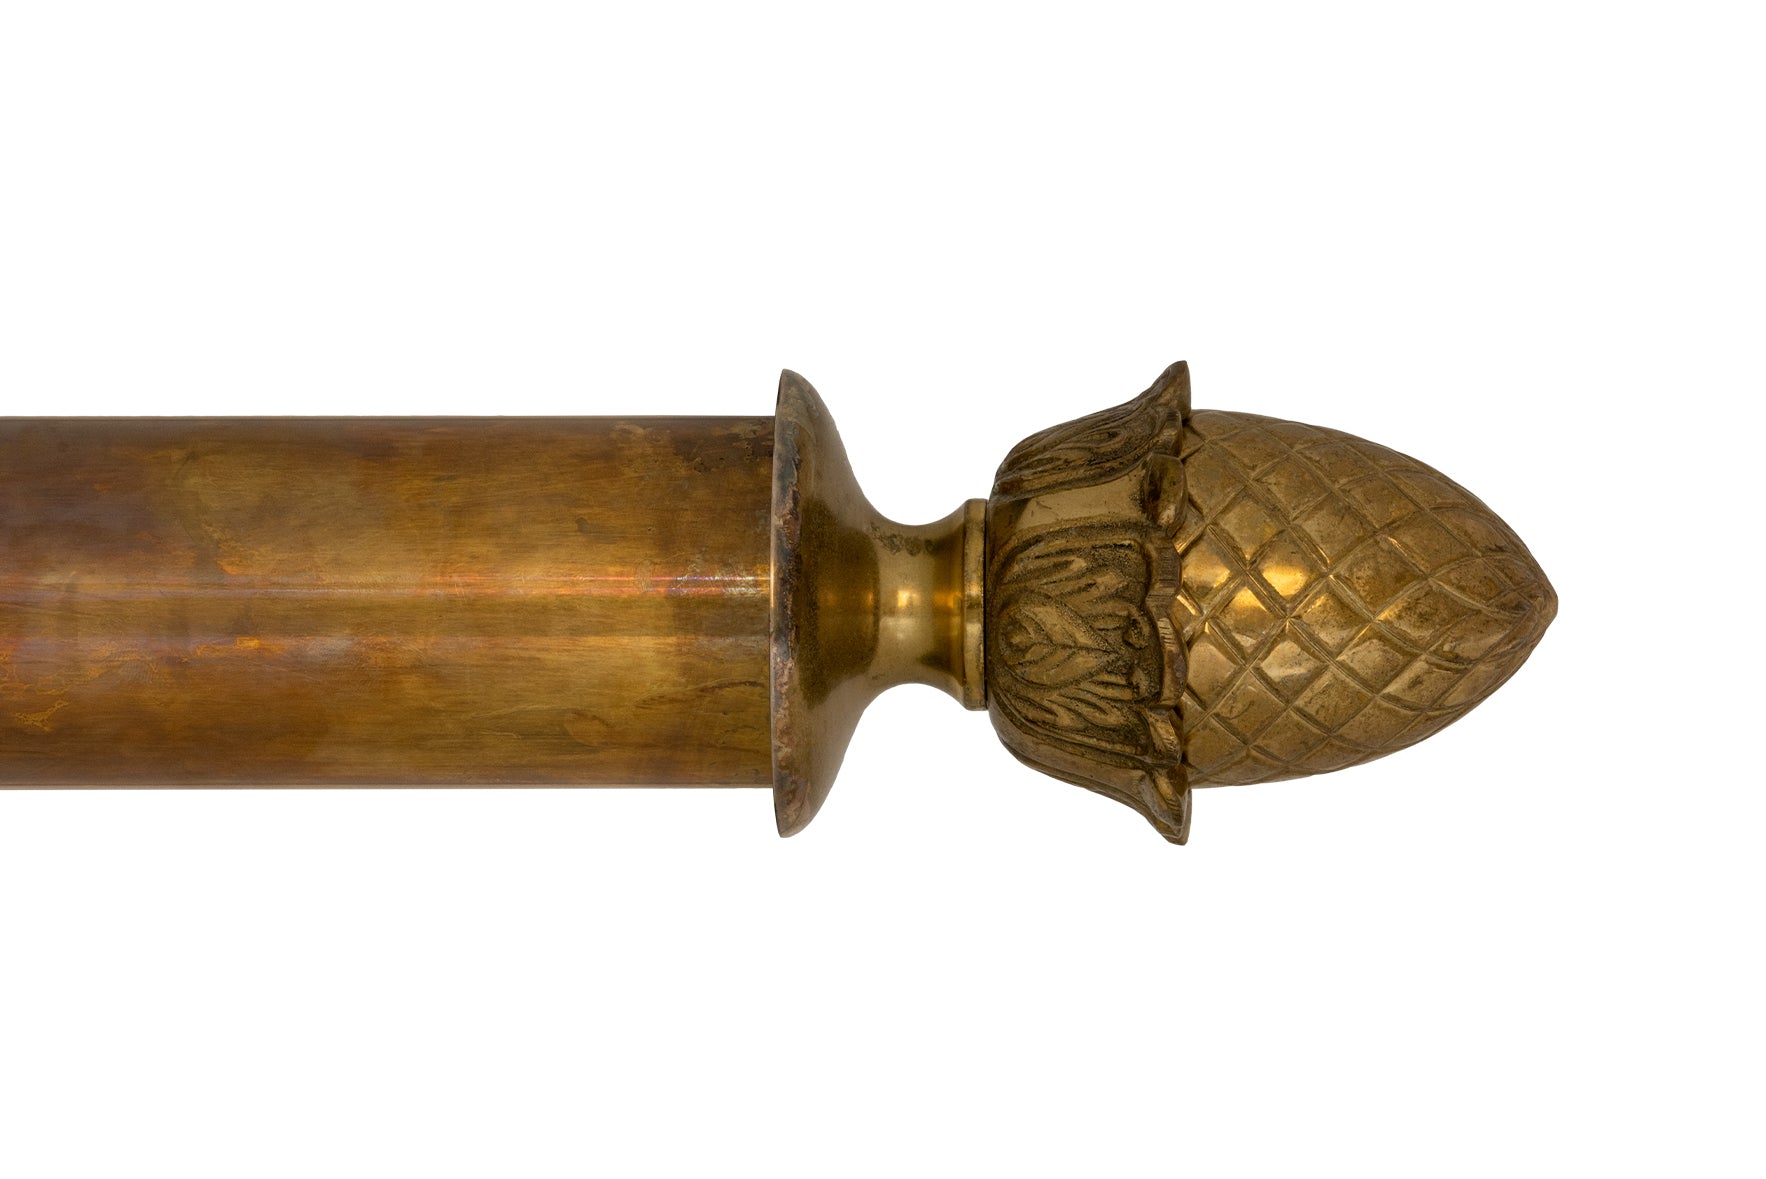 Tillys Classic Pineapple Finial Curtain Pole Set in Old Brass